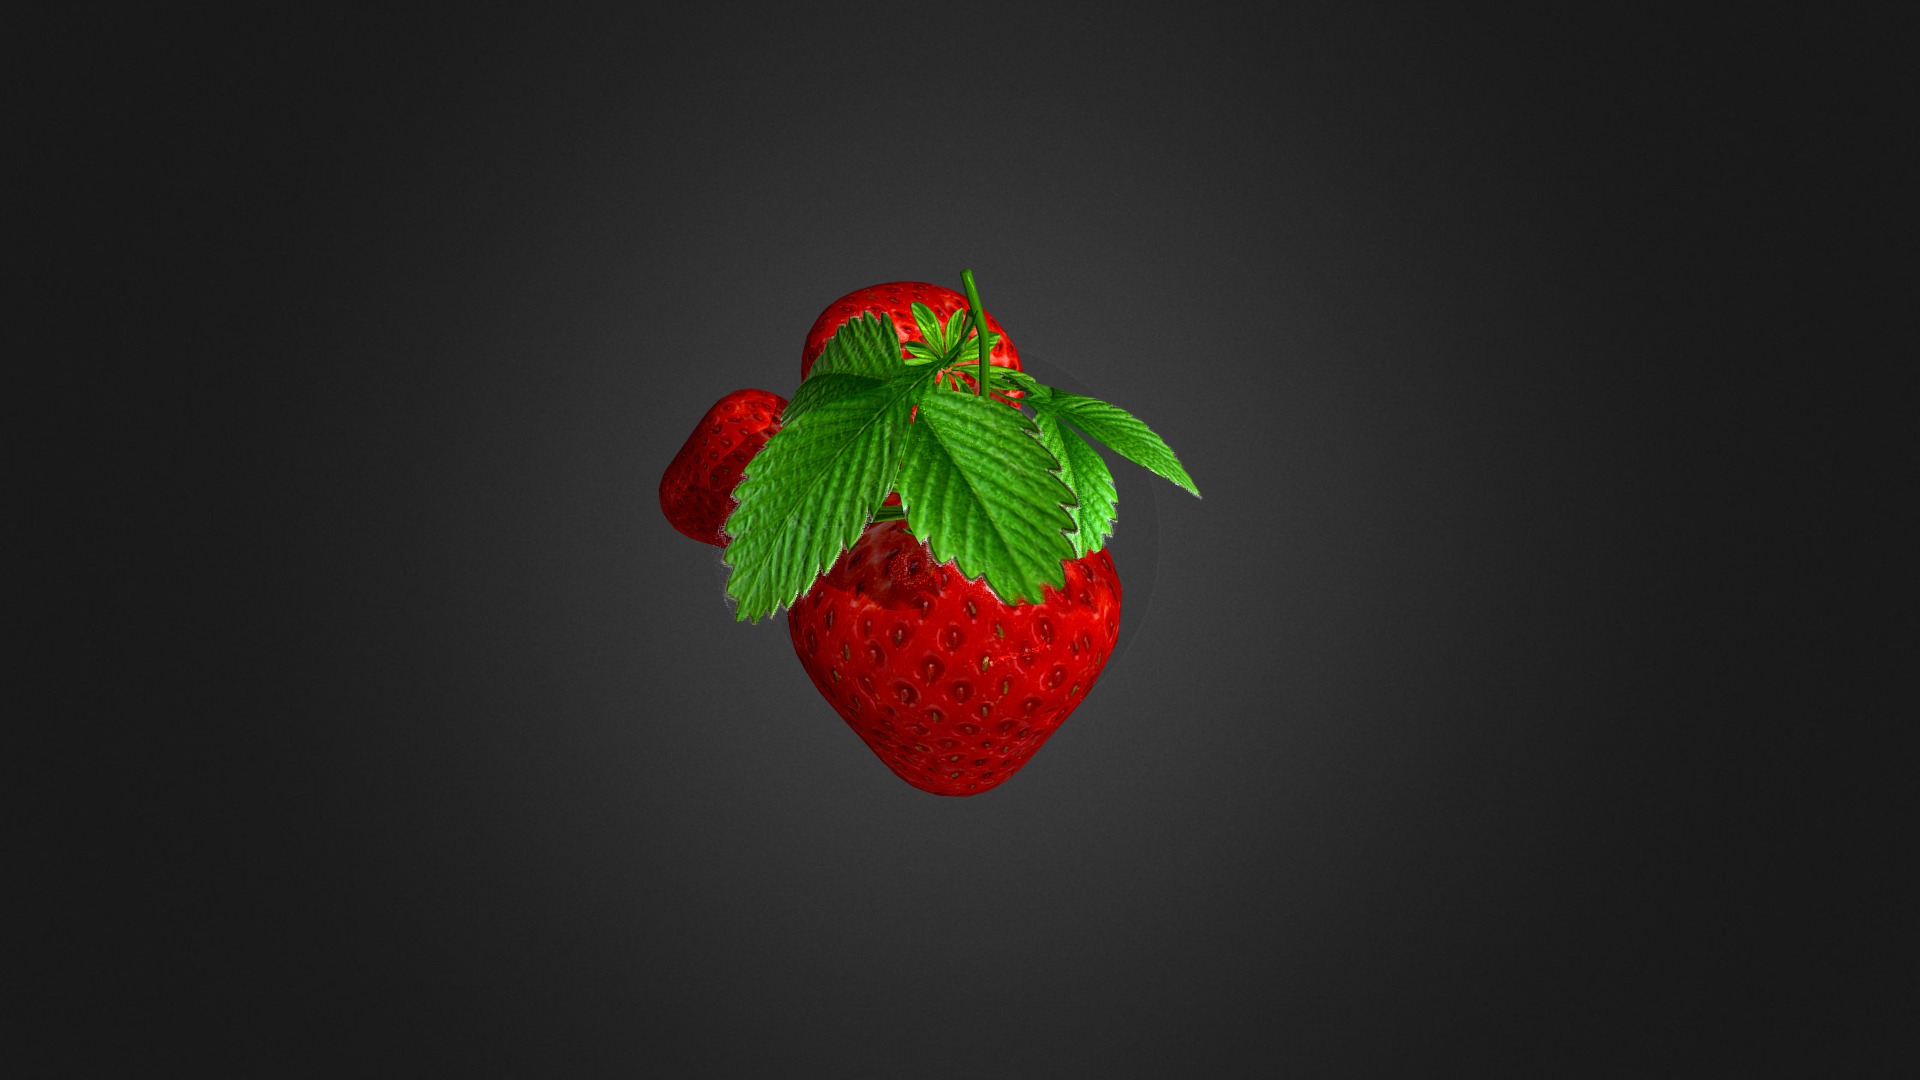 3D model Strawberry 3 - This is a 3D model of the Strawberry 3. The 3D model is about a strawberry with a green stem.